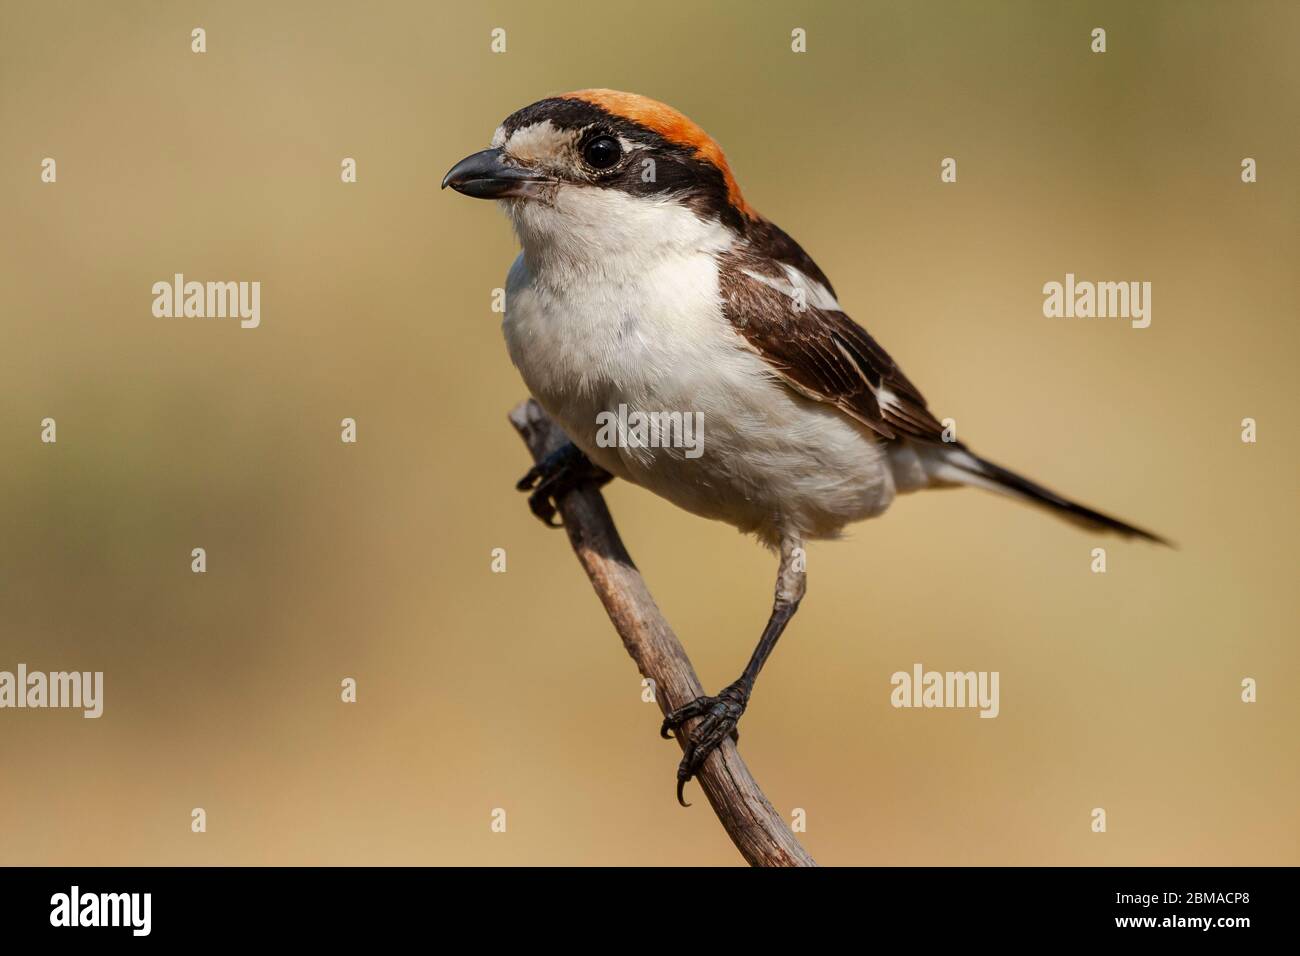 Woodchat Shrike, Senator Lanius, perched on a tree branch on a clear unfocused background . Spain Stock Photo